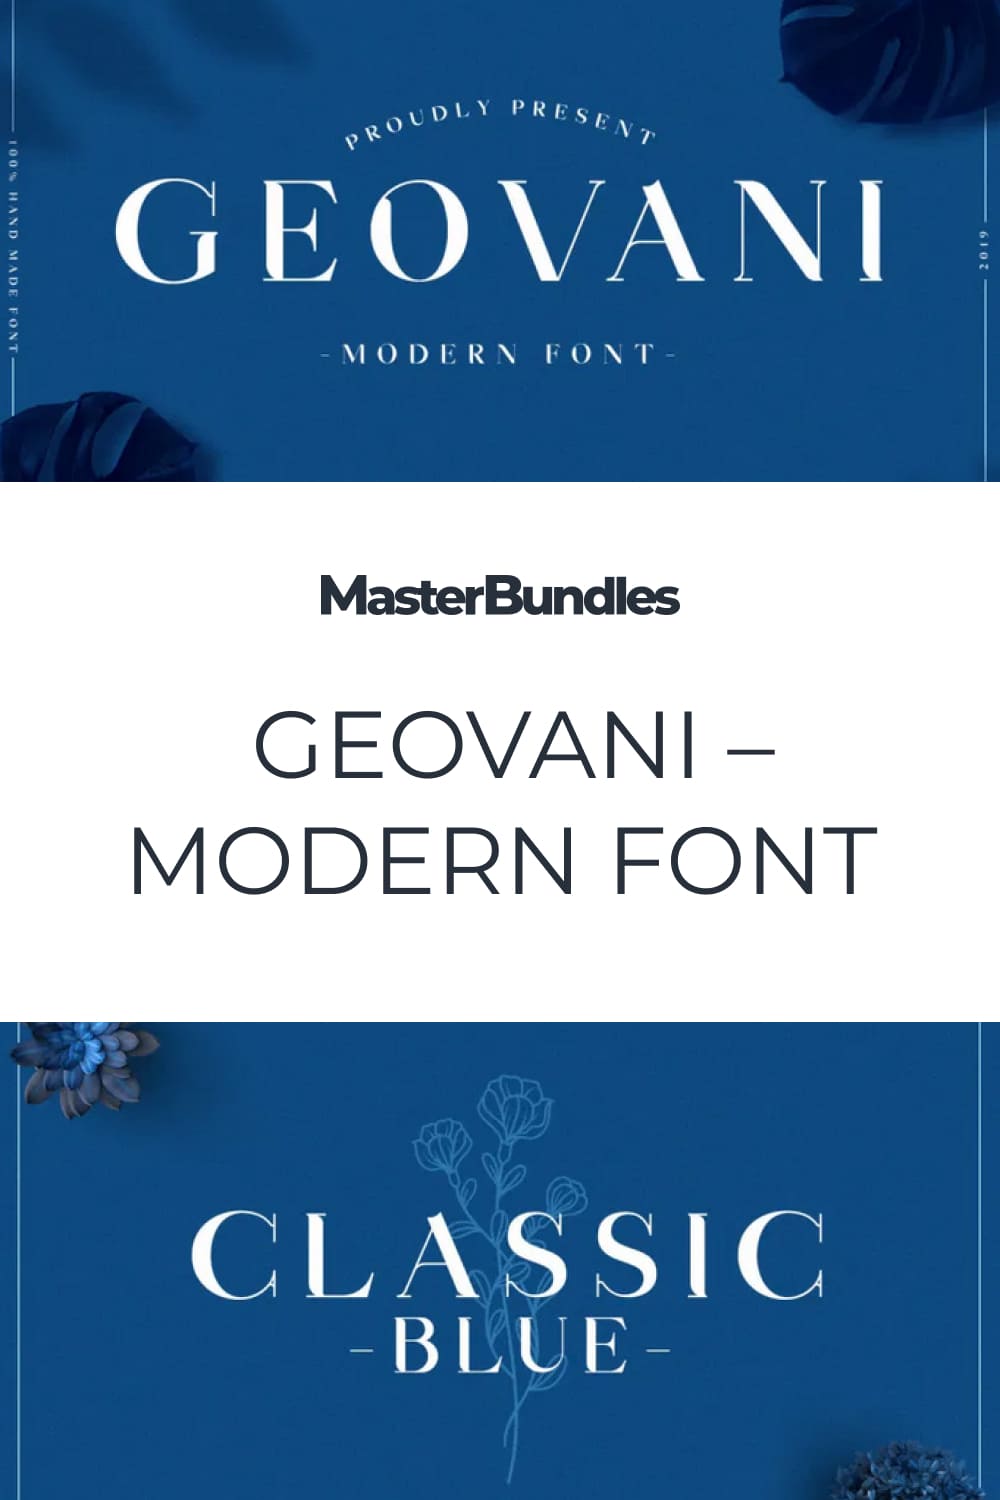 It’s a modern sans font with a strong character.